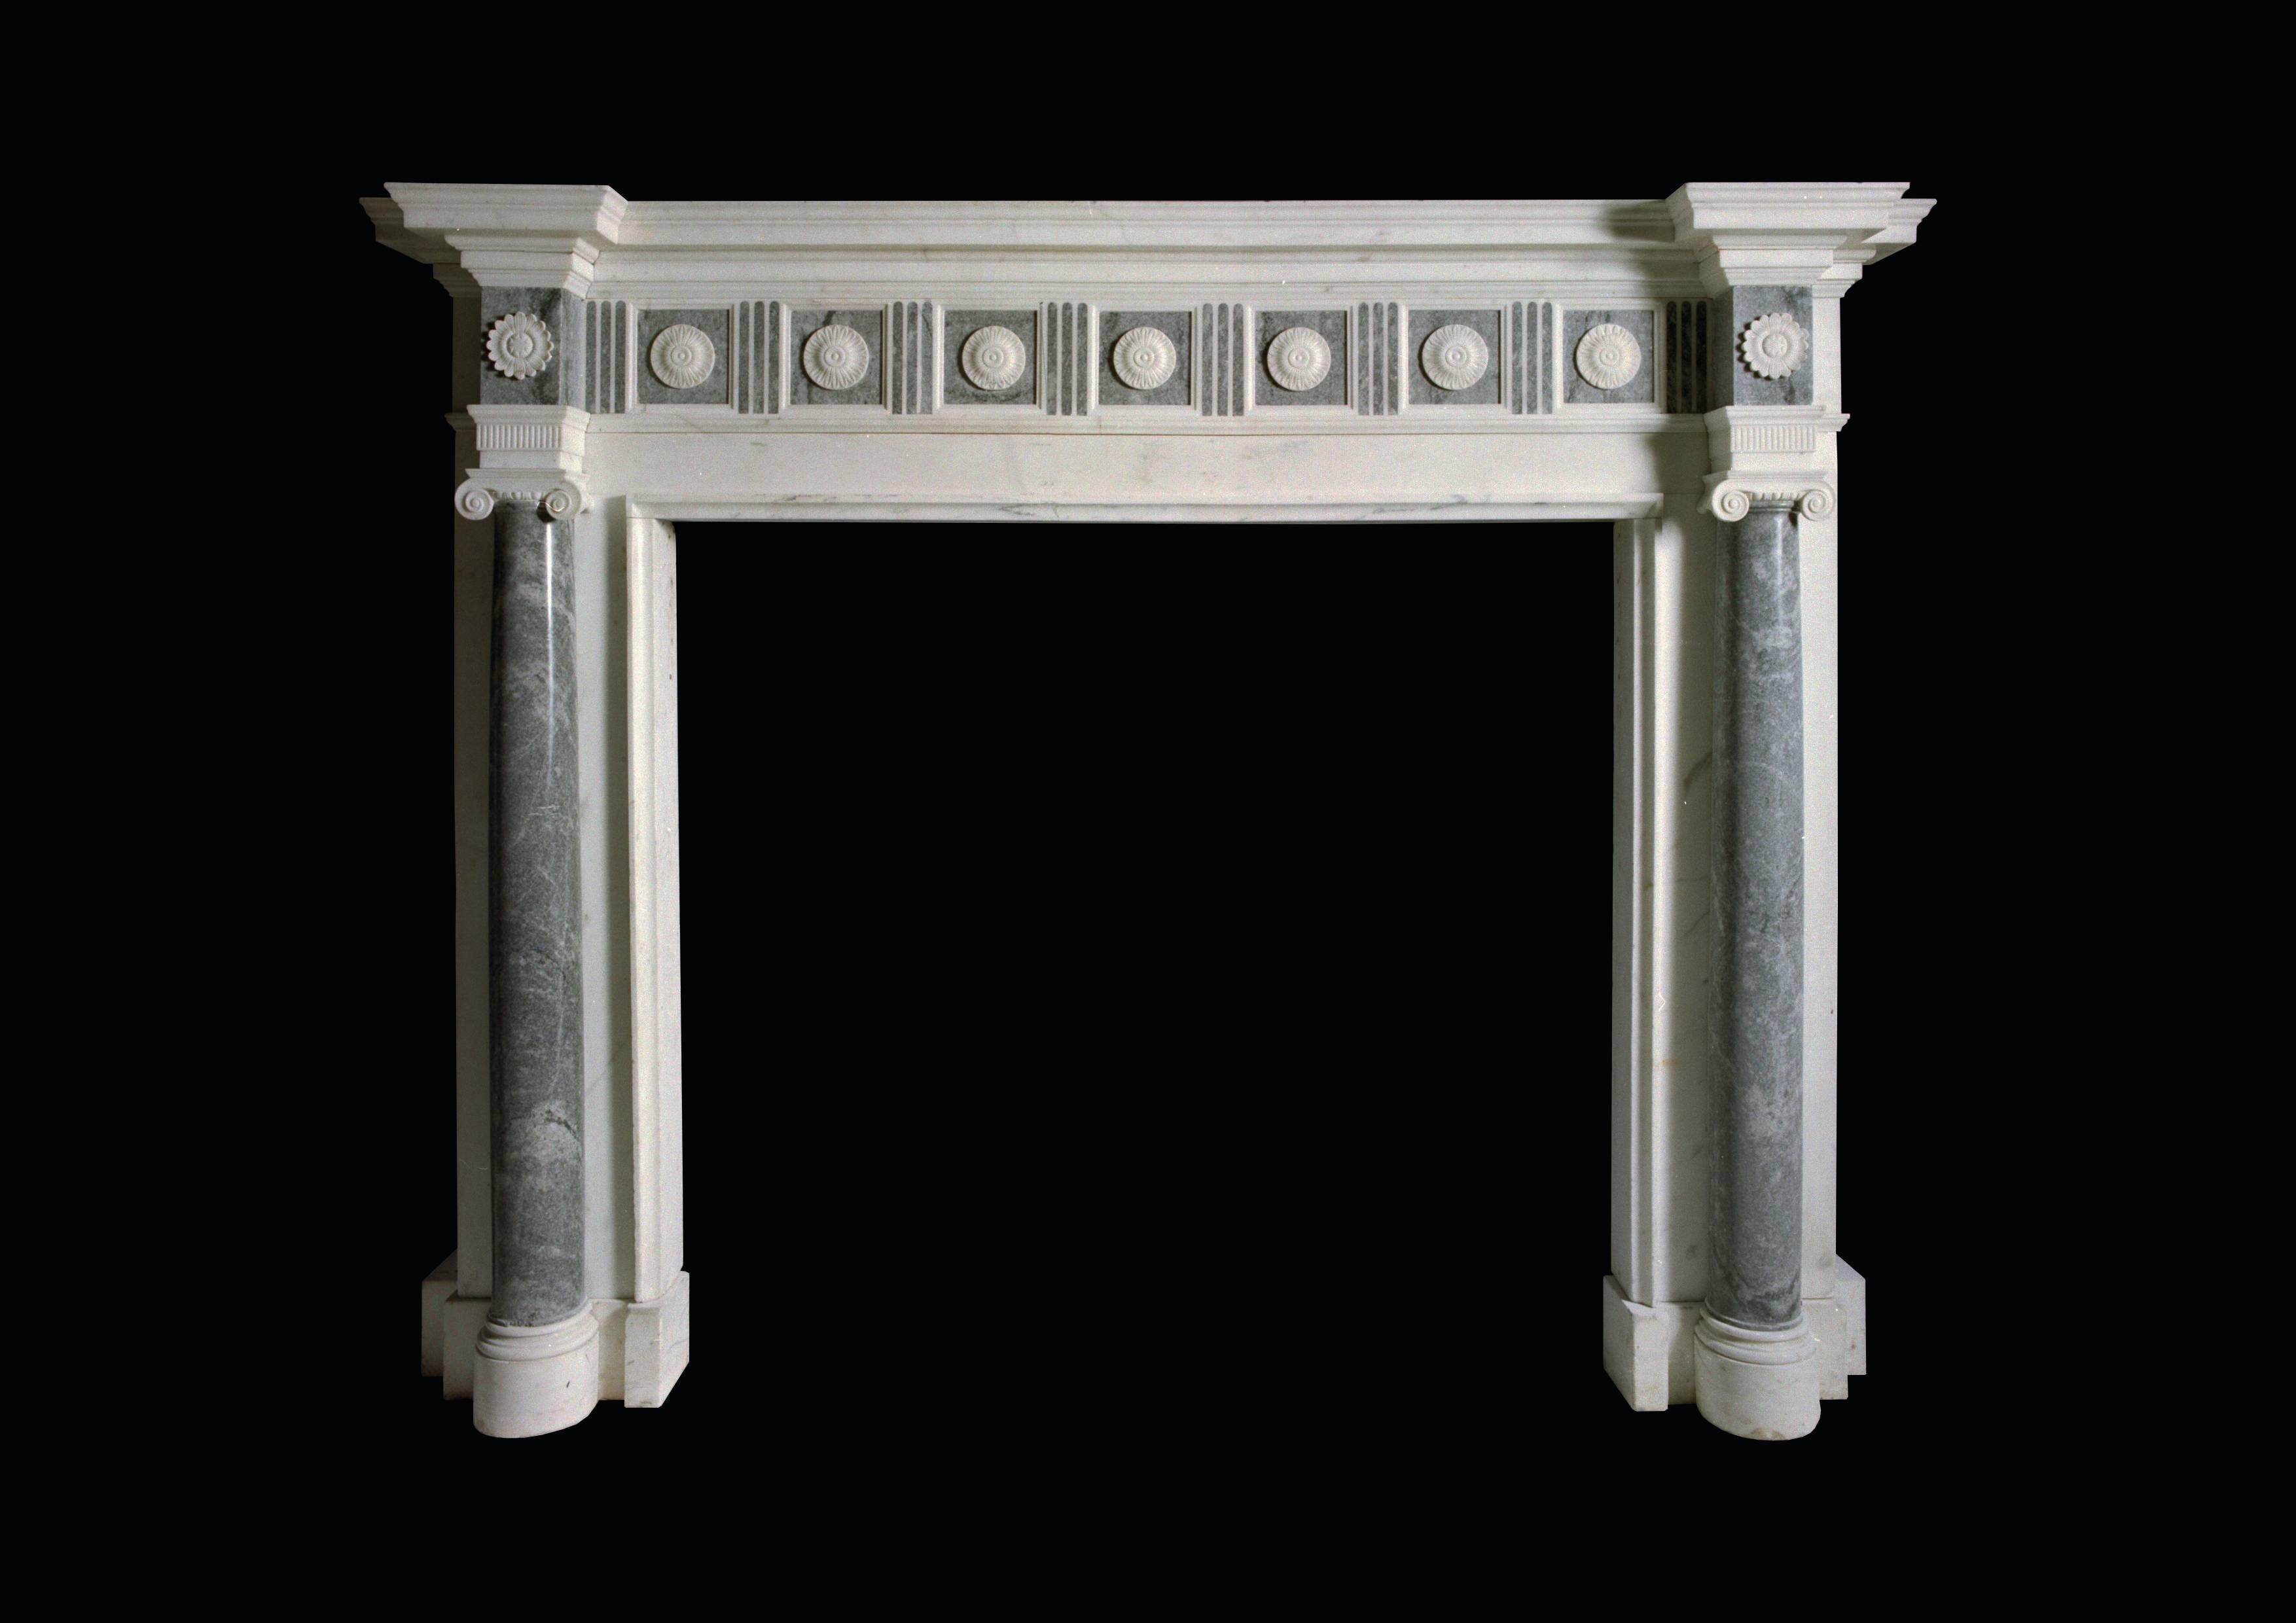 Reproduction of an important late 18th century English chimneypiece in statuary marble with engaged three quarter columns in Bardiglio Imperiale marble. The running frieze and corner blocks of the same material, the former overlaid with finely